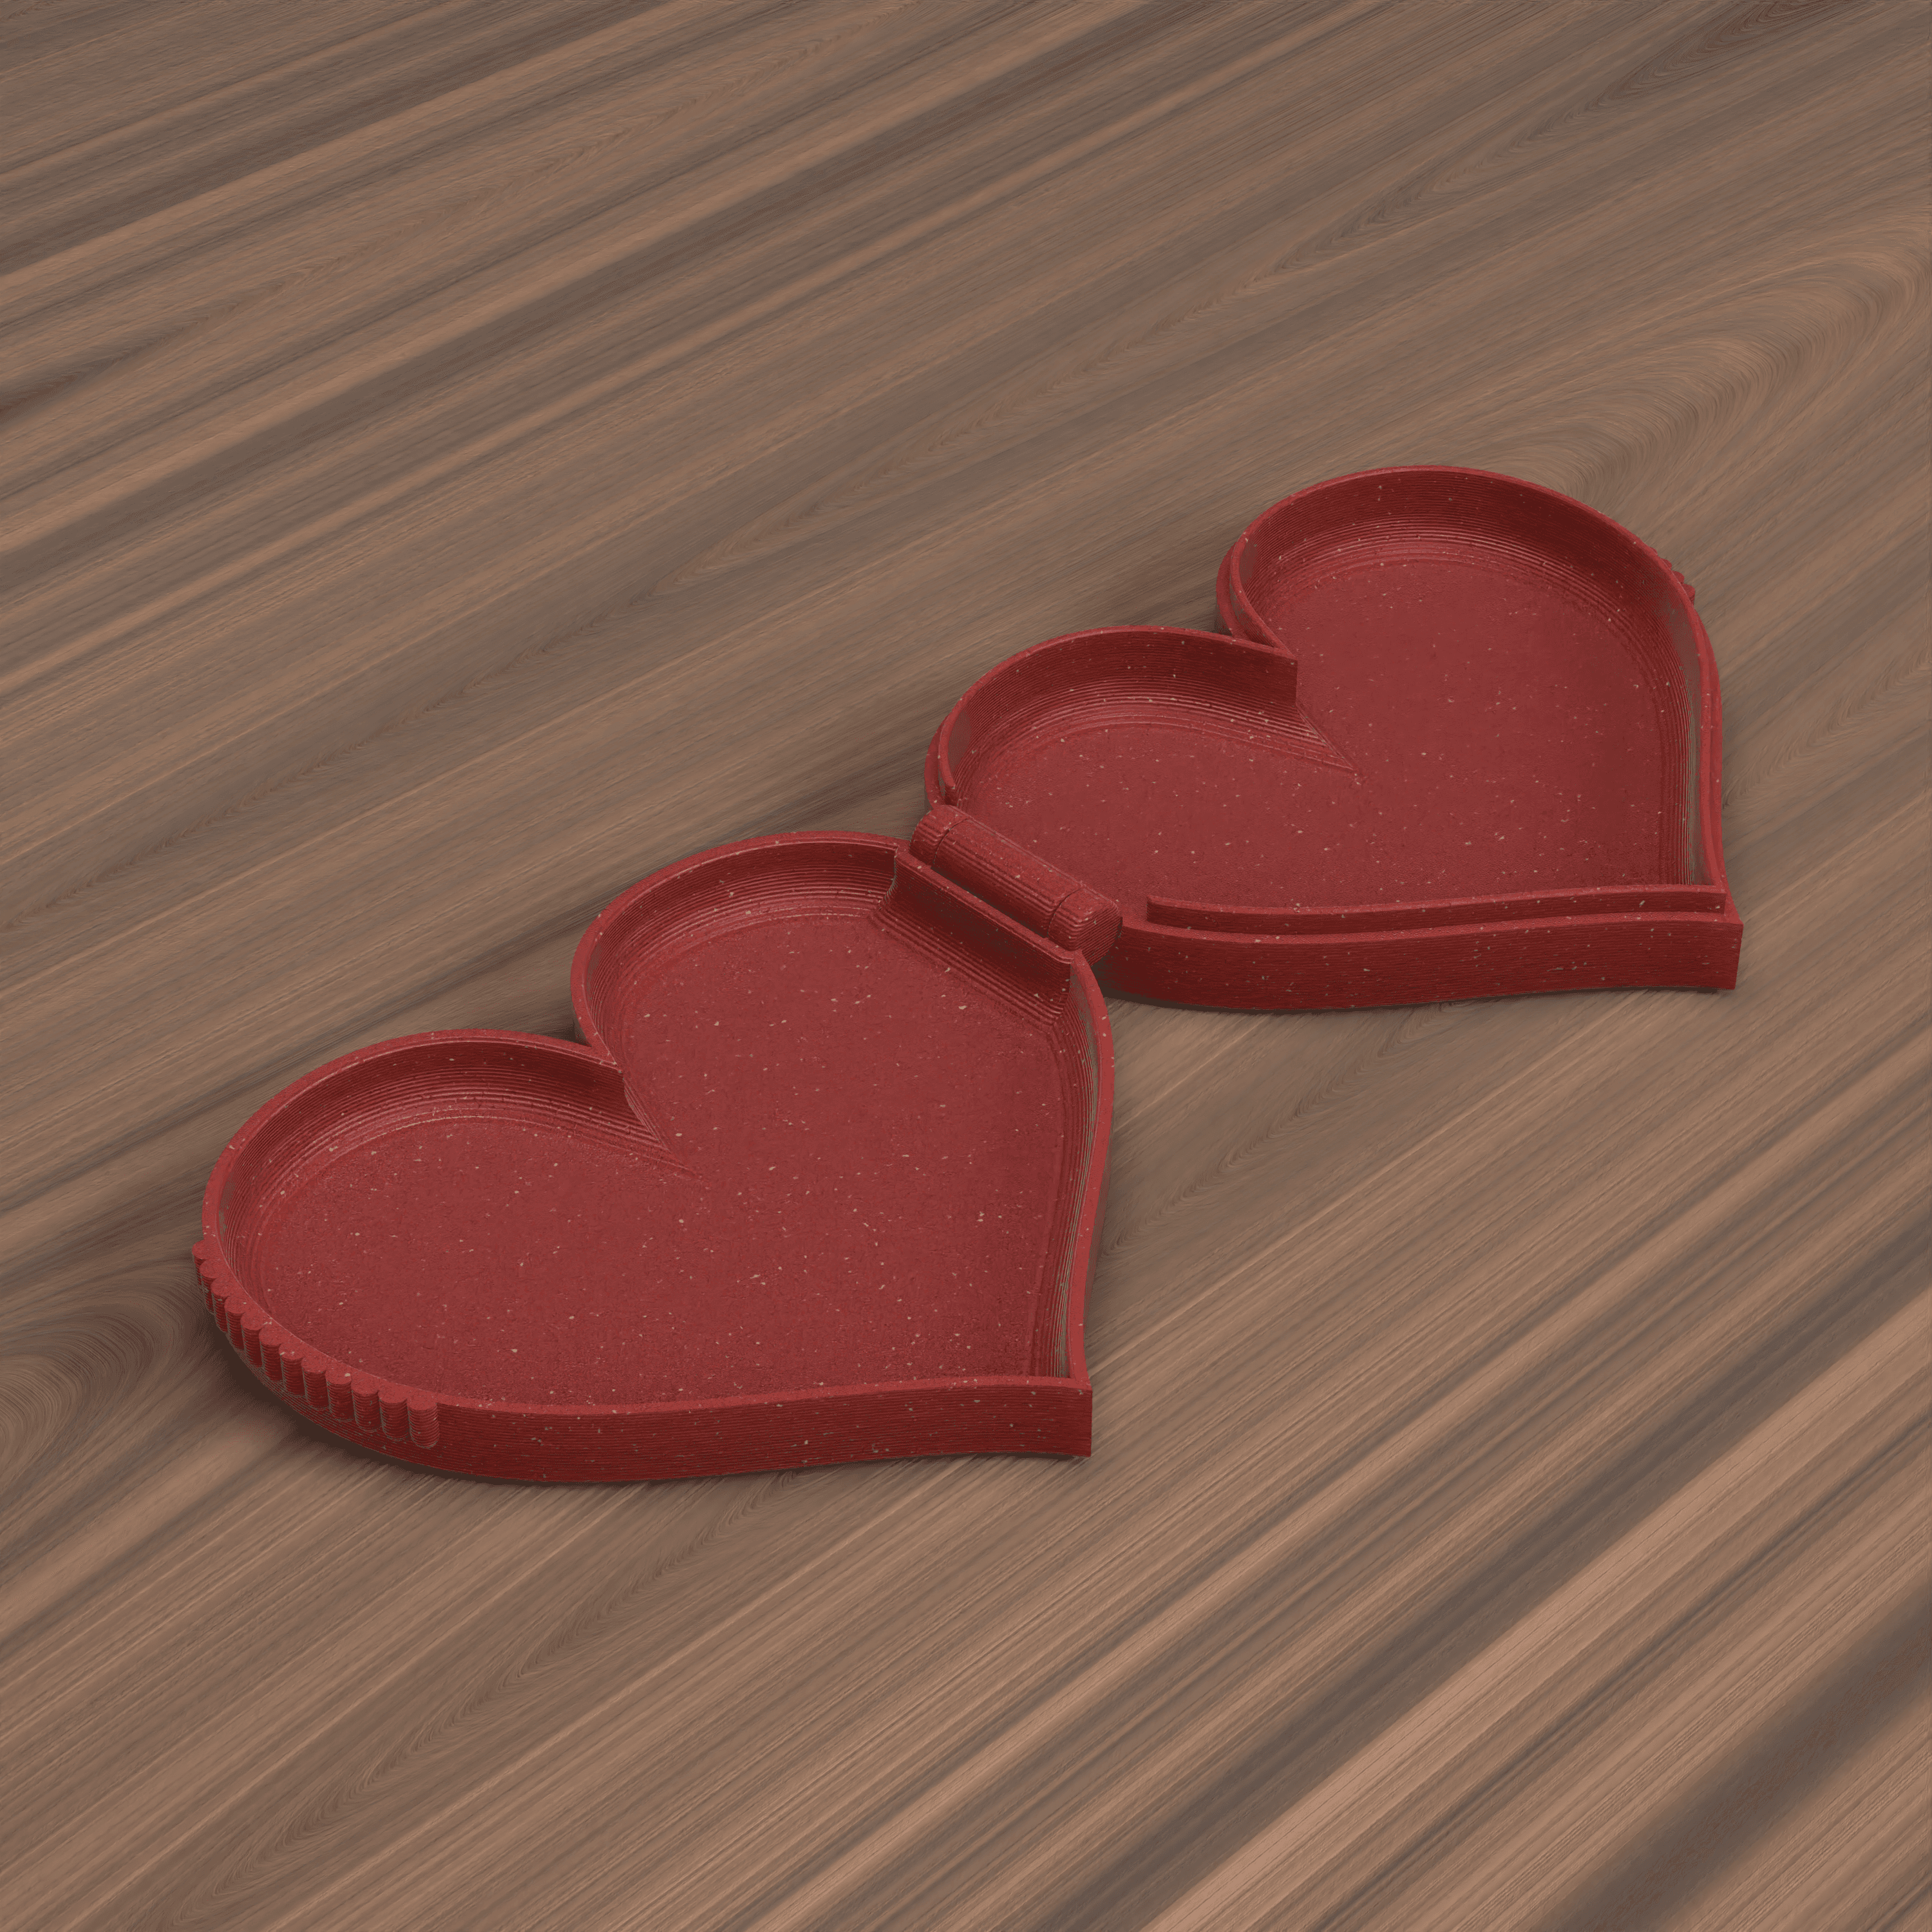 HEART SHAPED BOX (print in place) 3d model